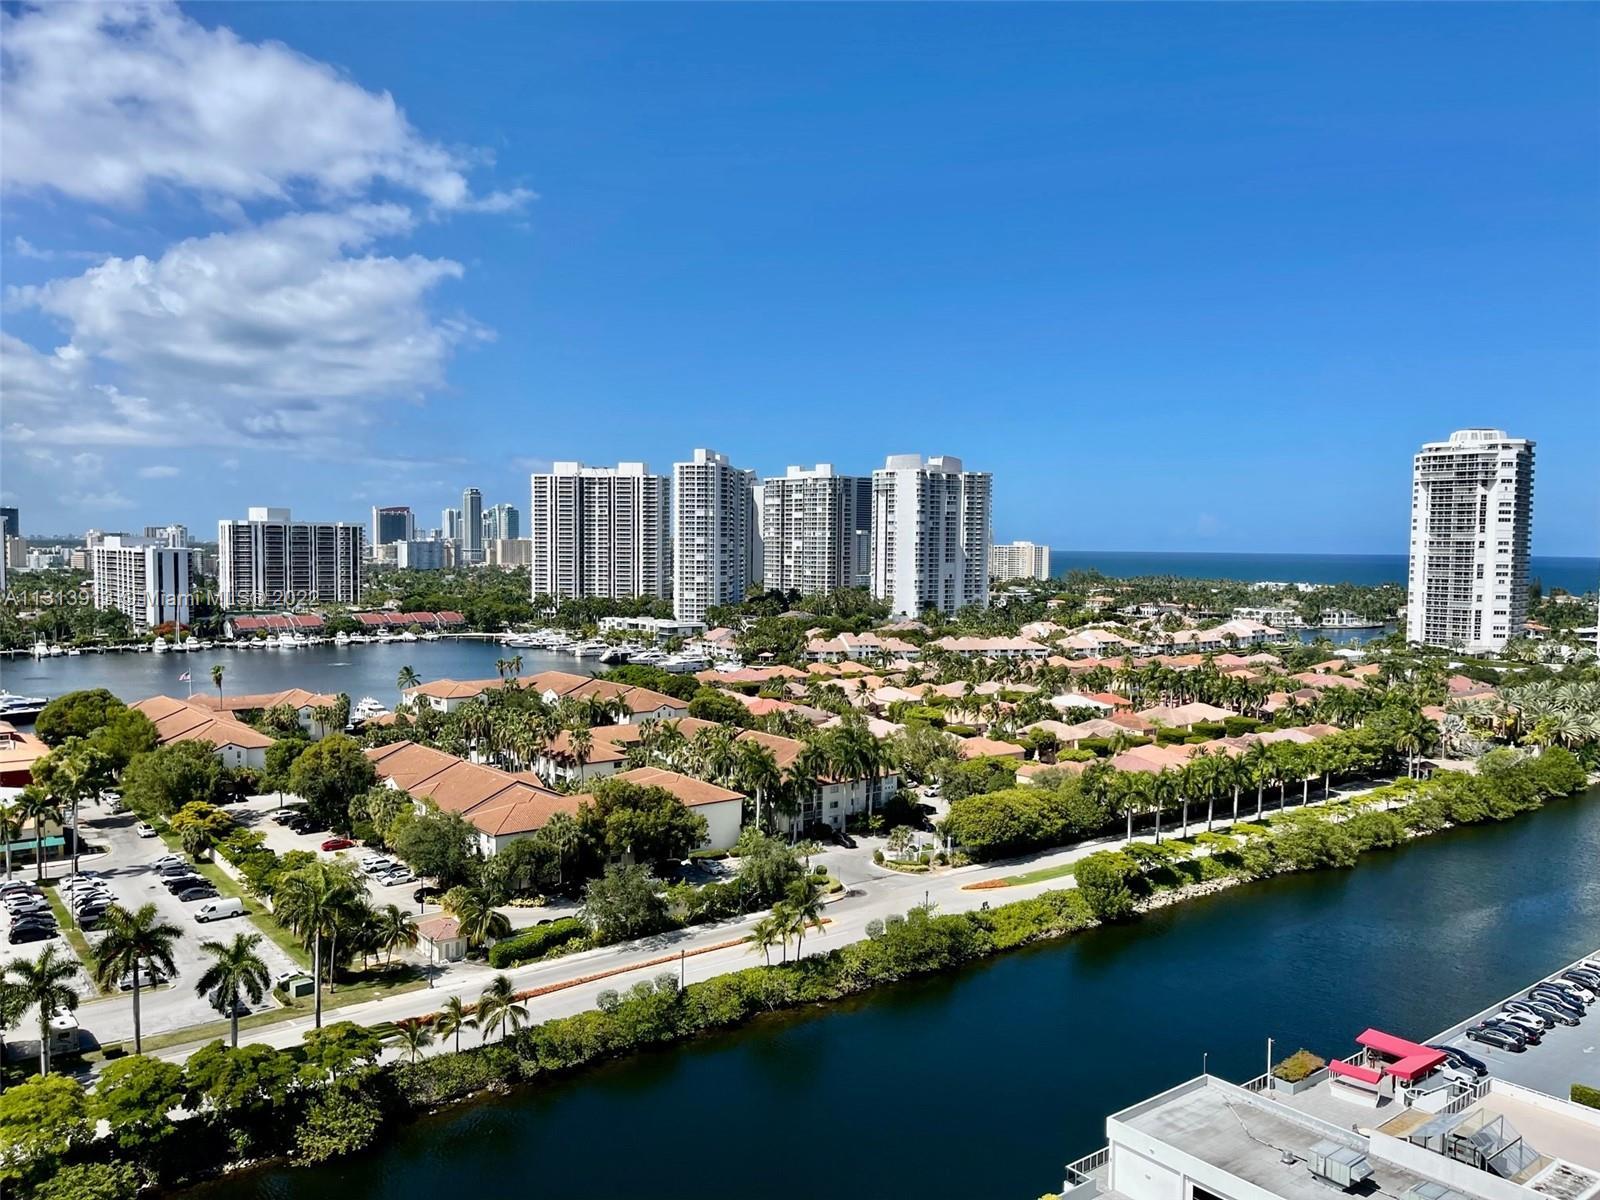 STUNNIG VIEWS LOCATED IN THE HEART OF AVENTURA 2 FULL BEDROOM AND 2 BATHS, LAKE AND GOLF COURSE VIEW